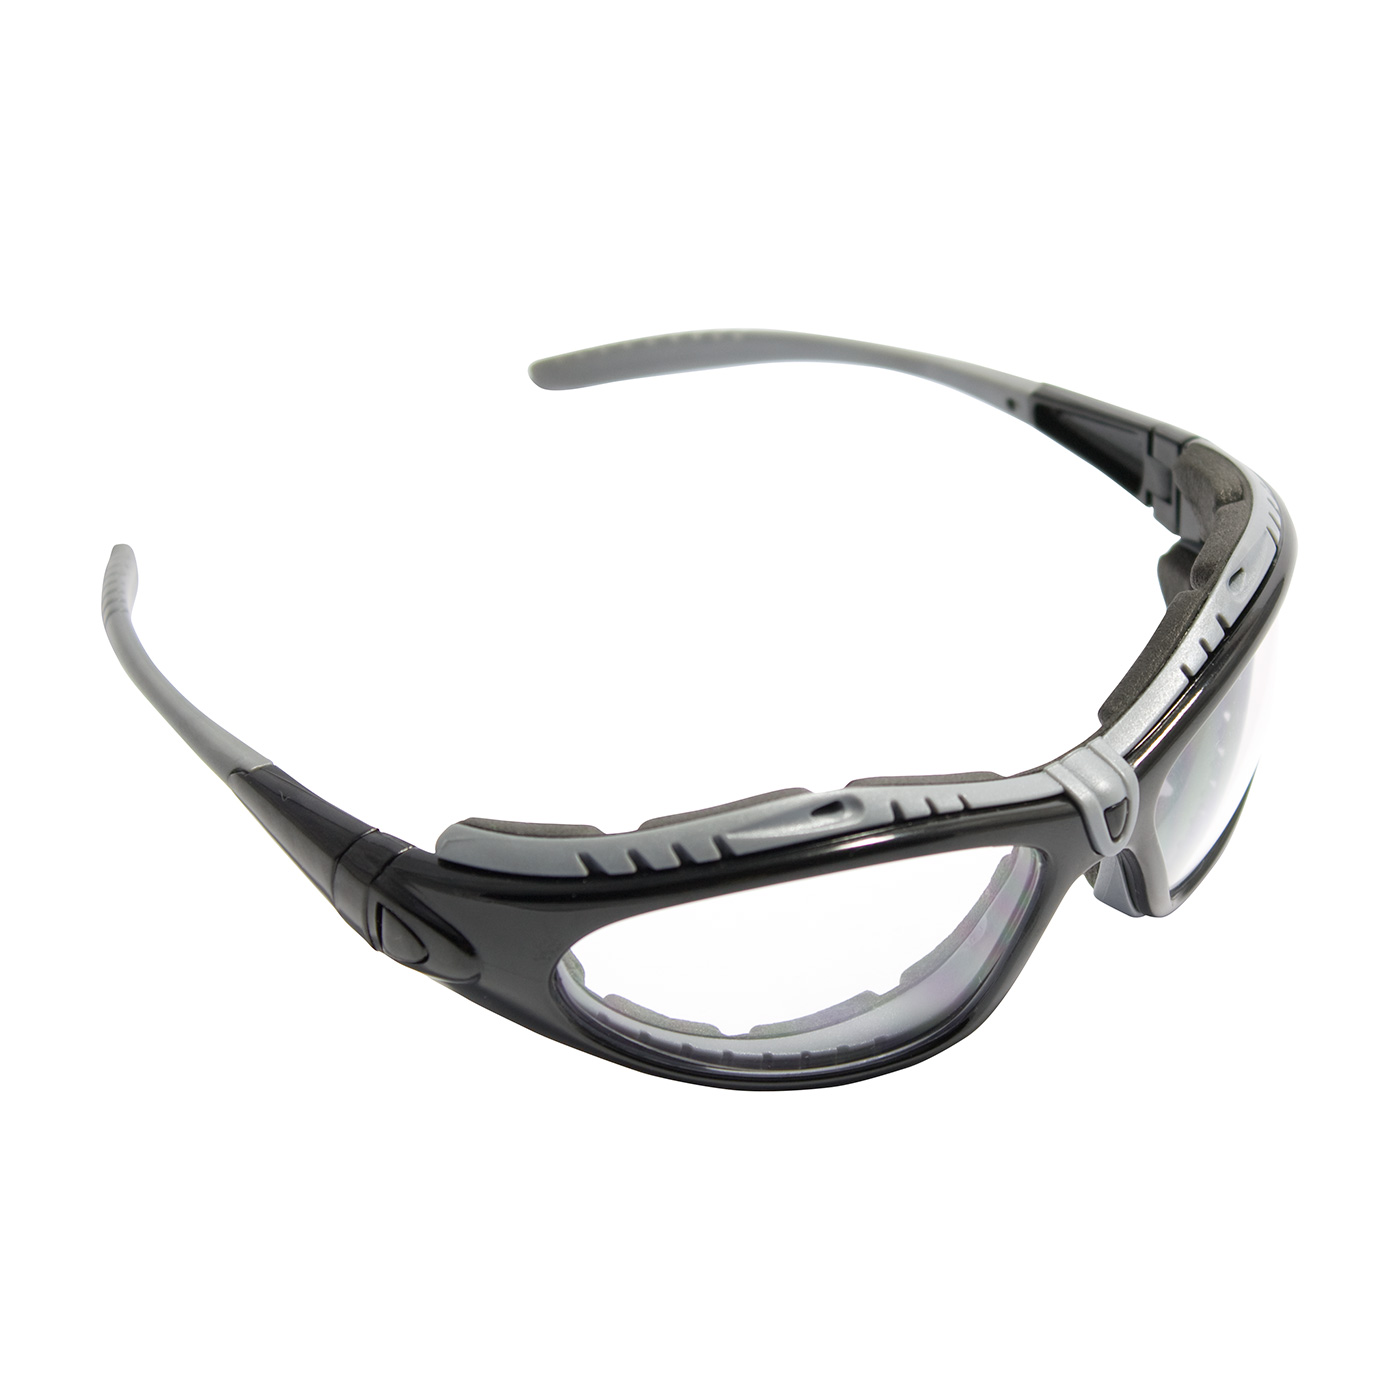 Foam-Lined Safety Glasses